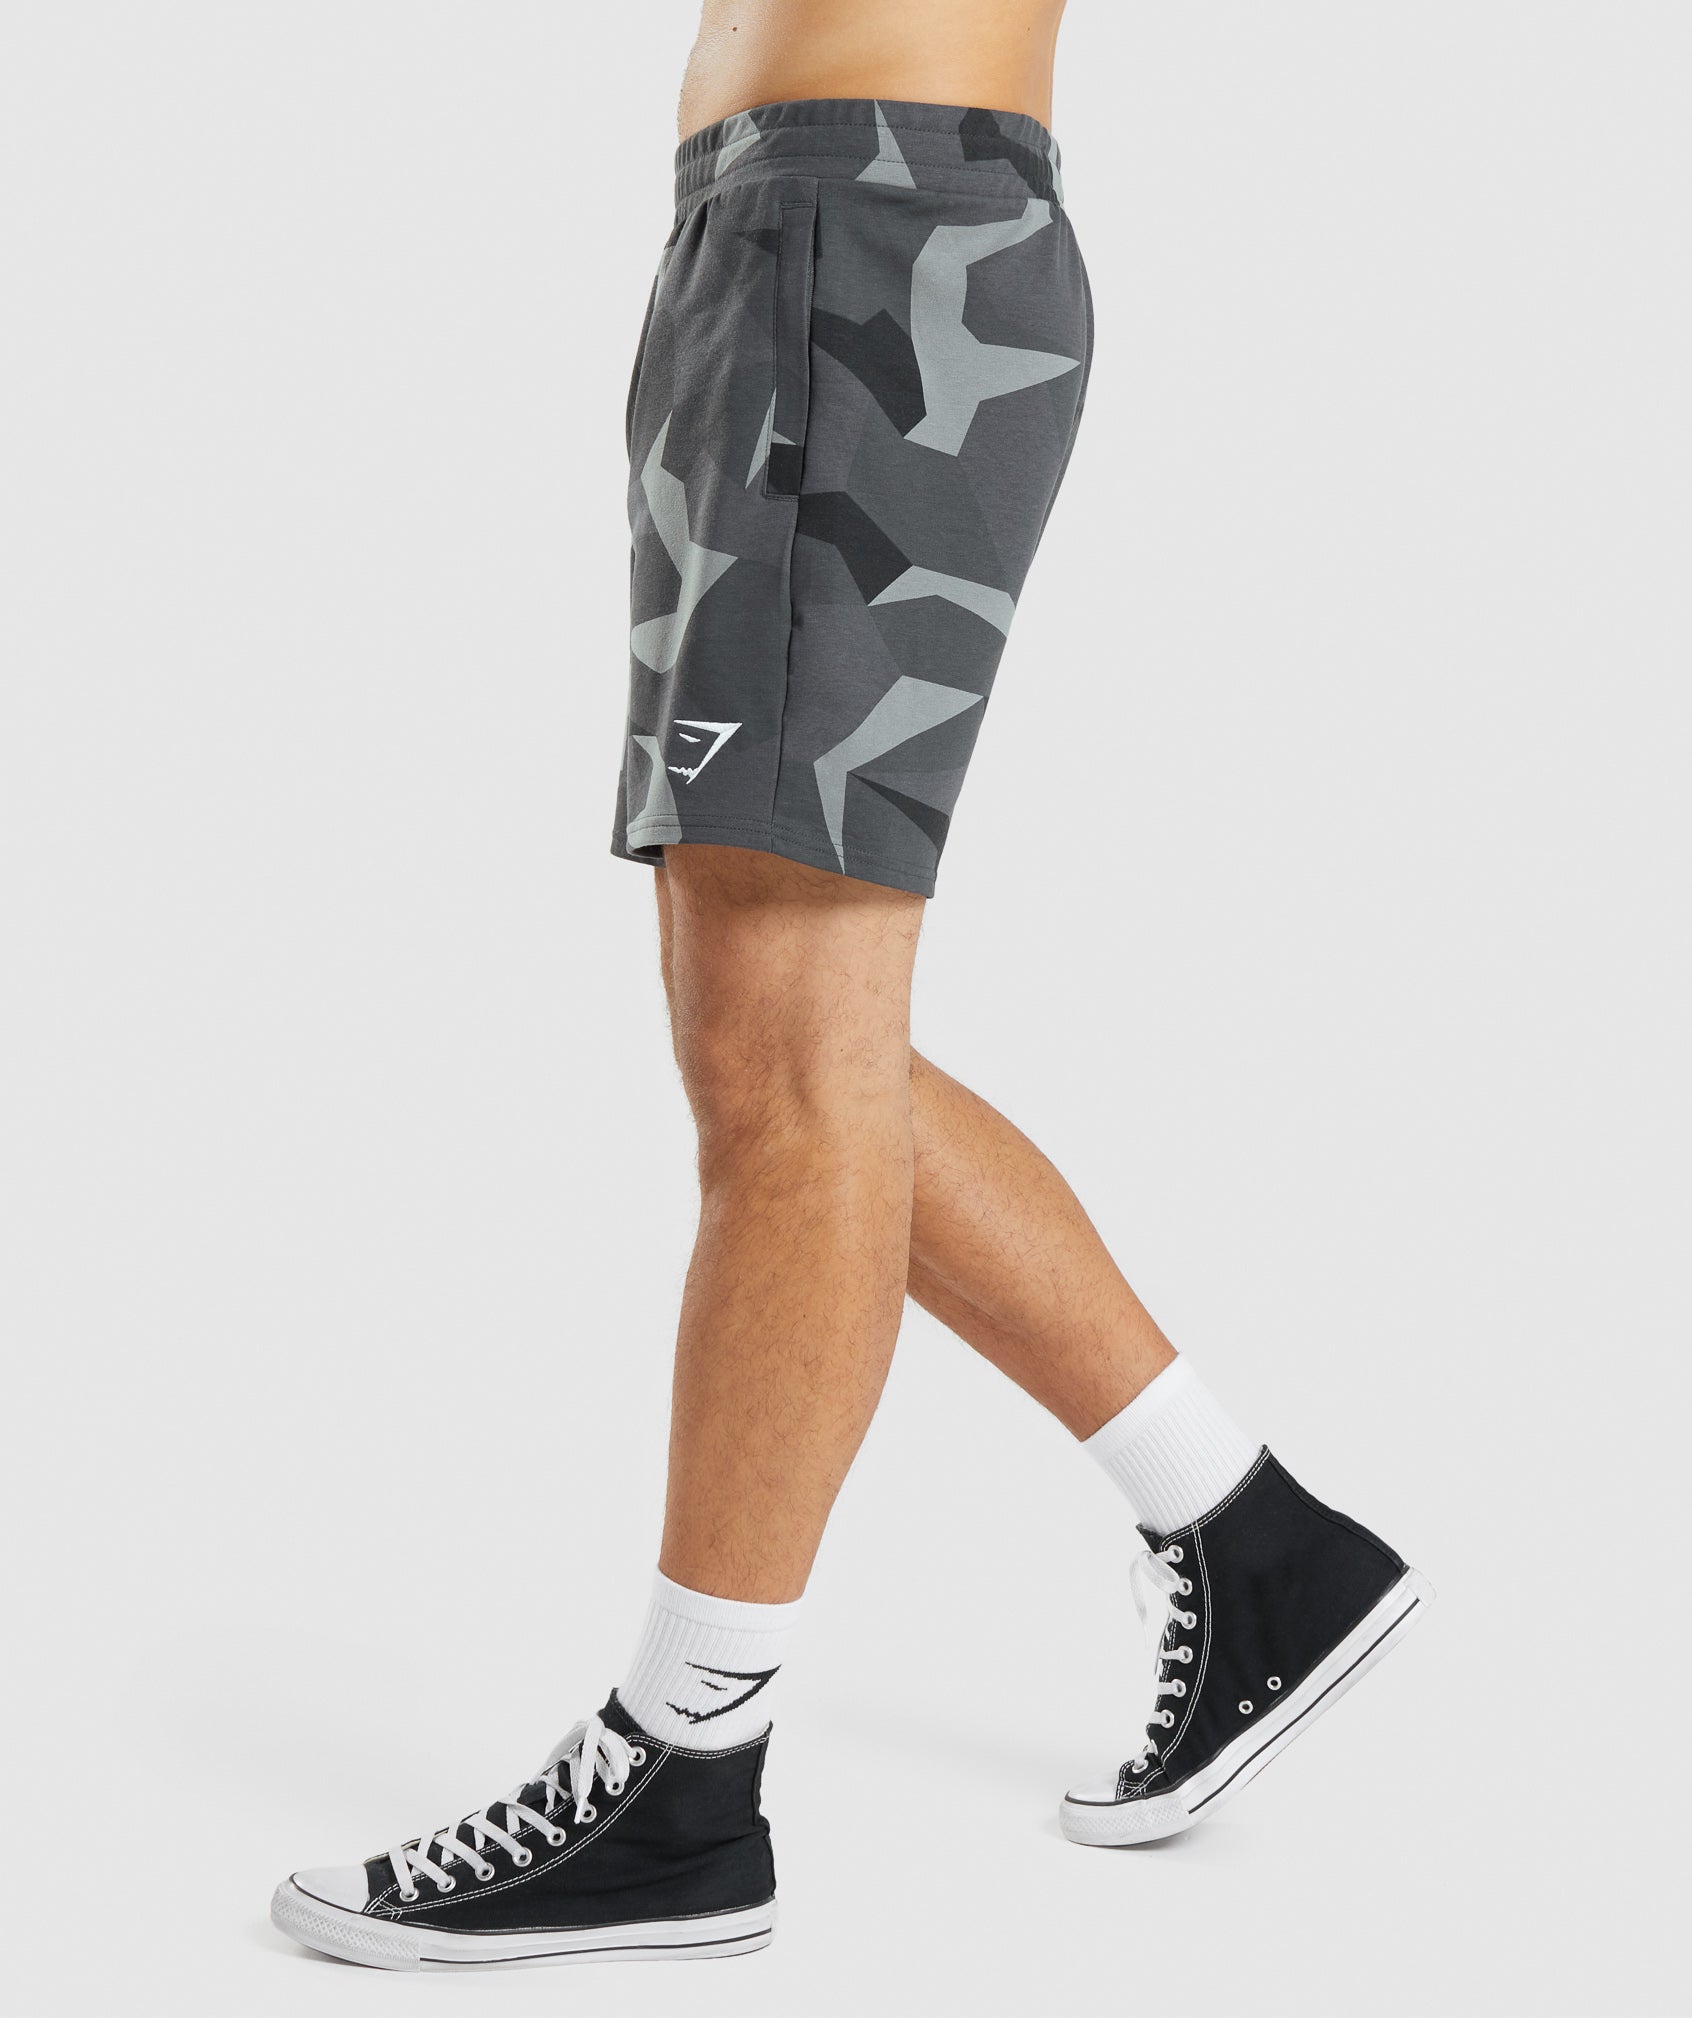 Critical 7" Shorts in Black Print - view 3